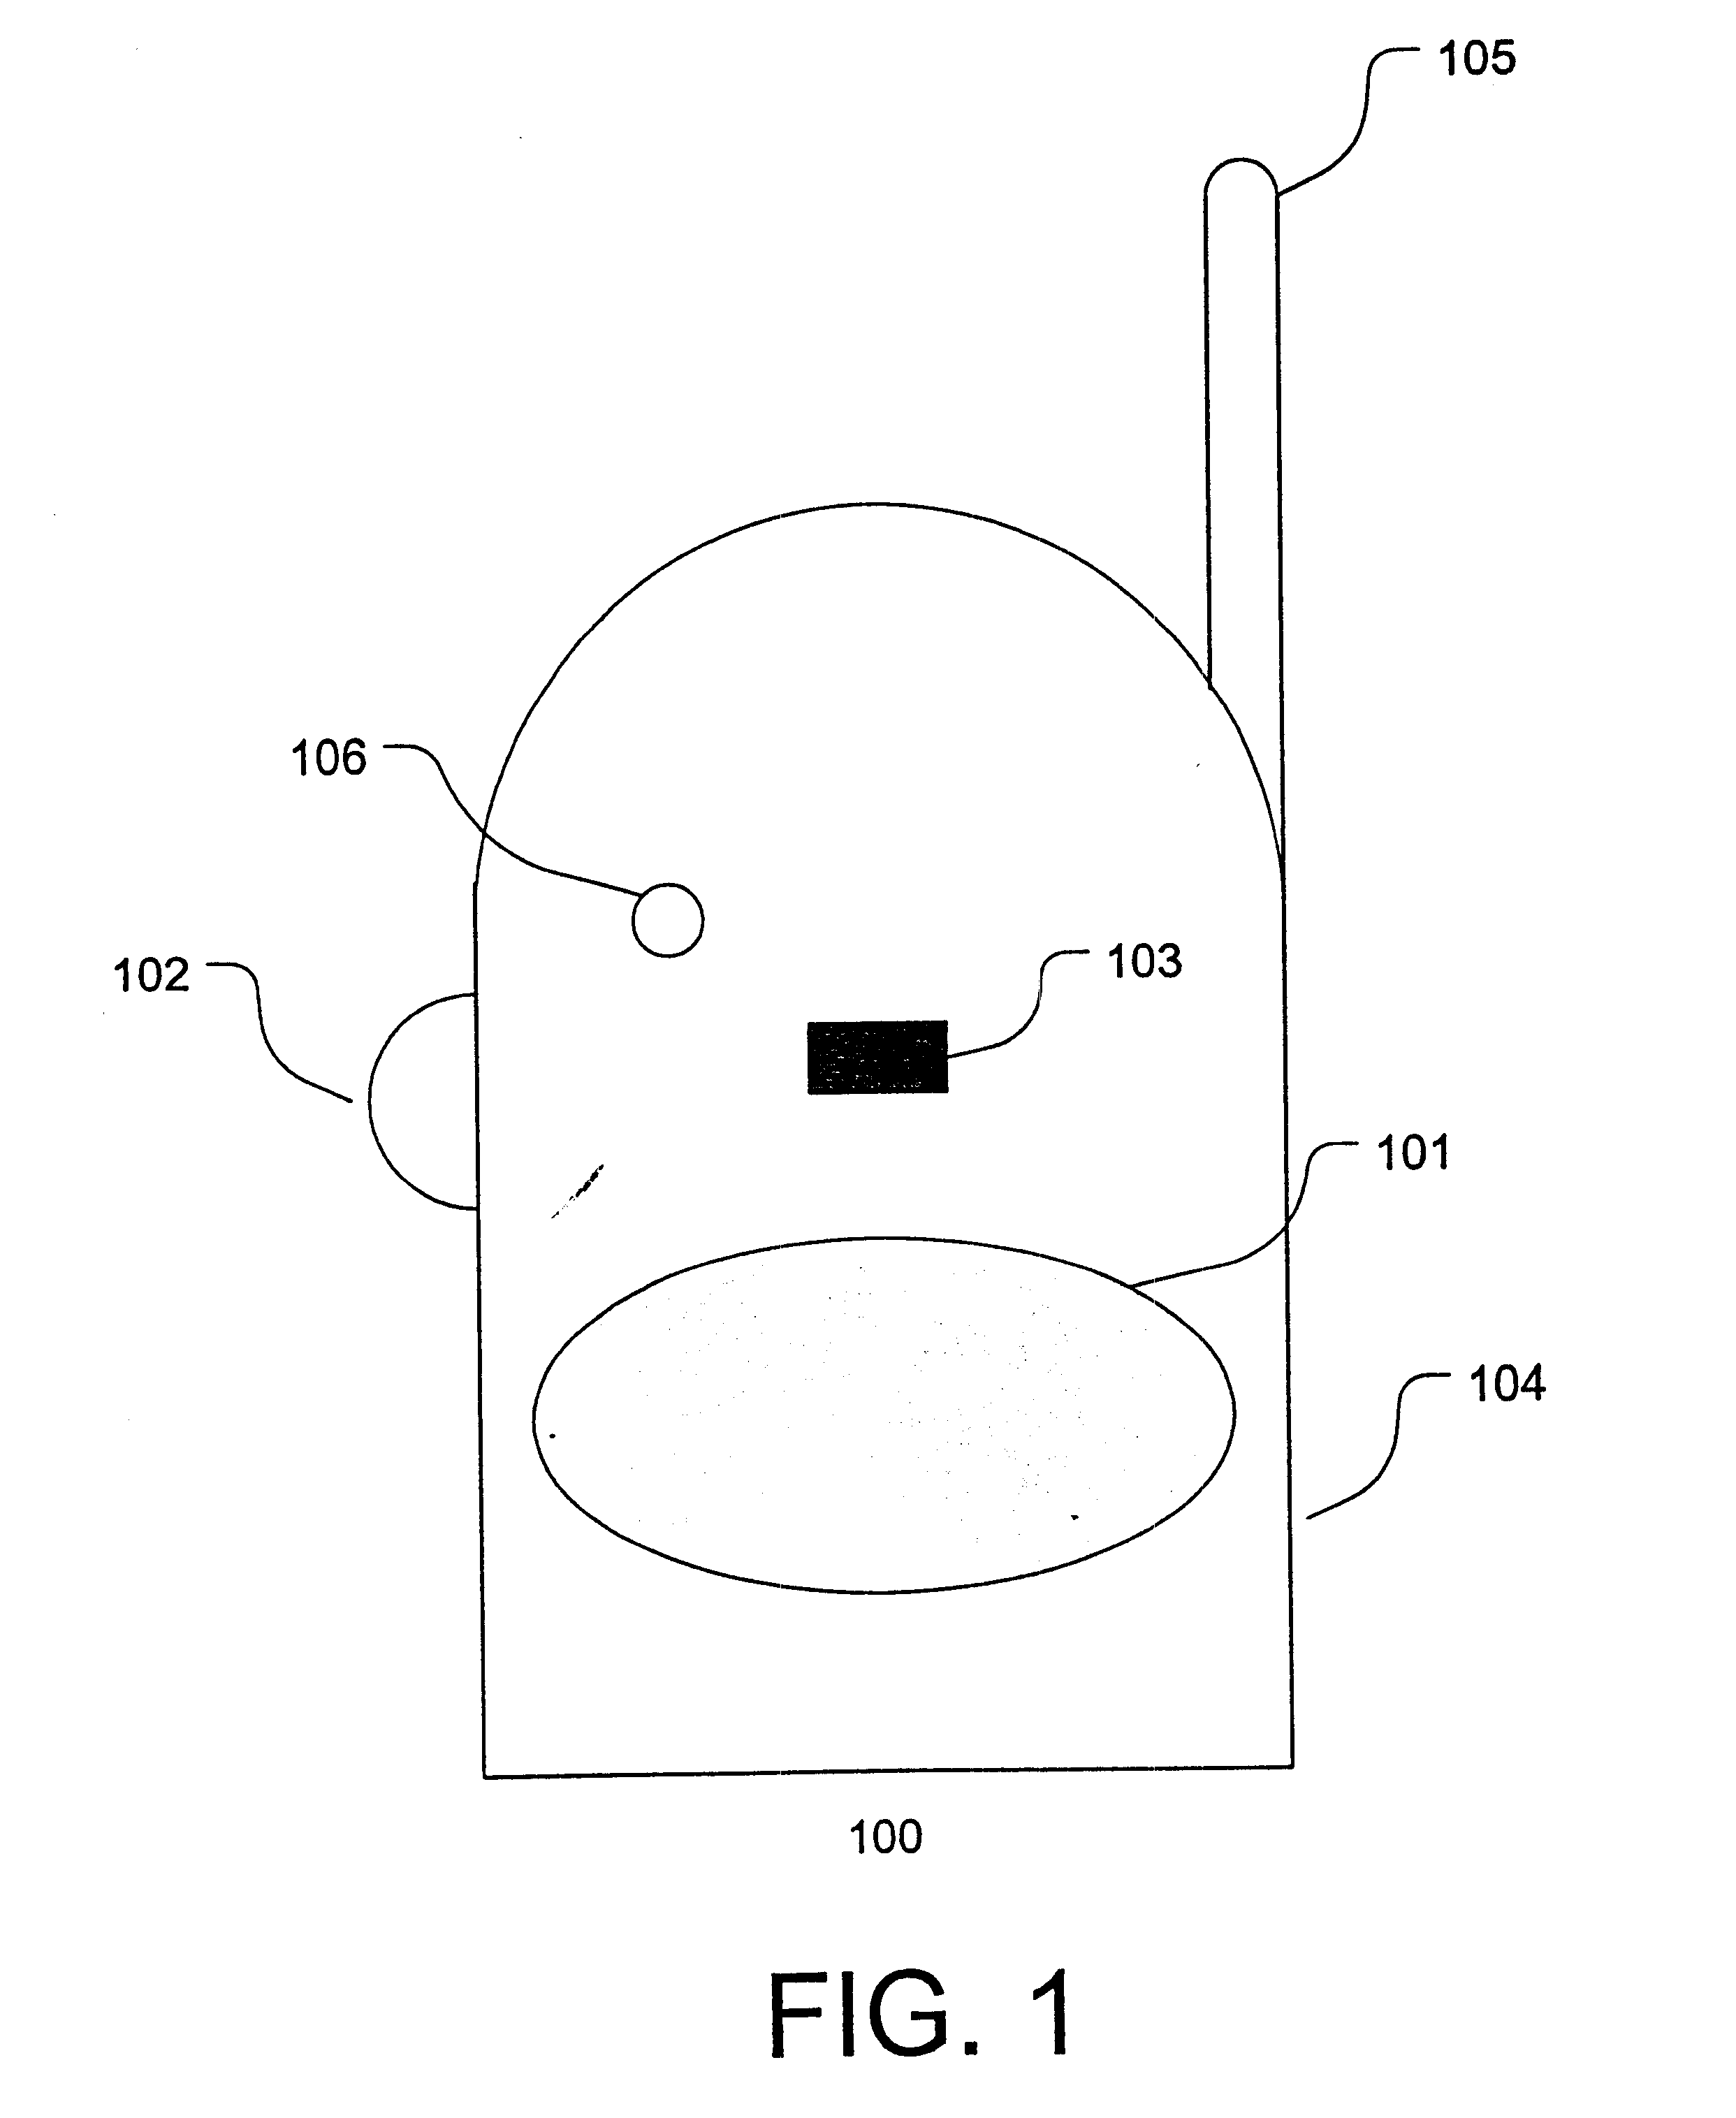 Baby monitor, system, and method and control of remote devices